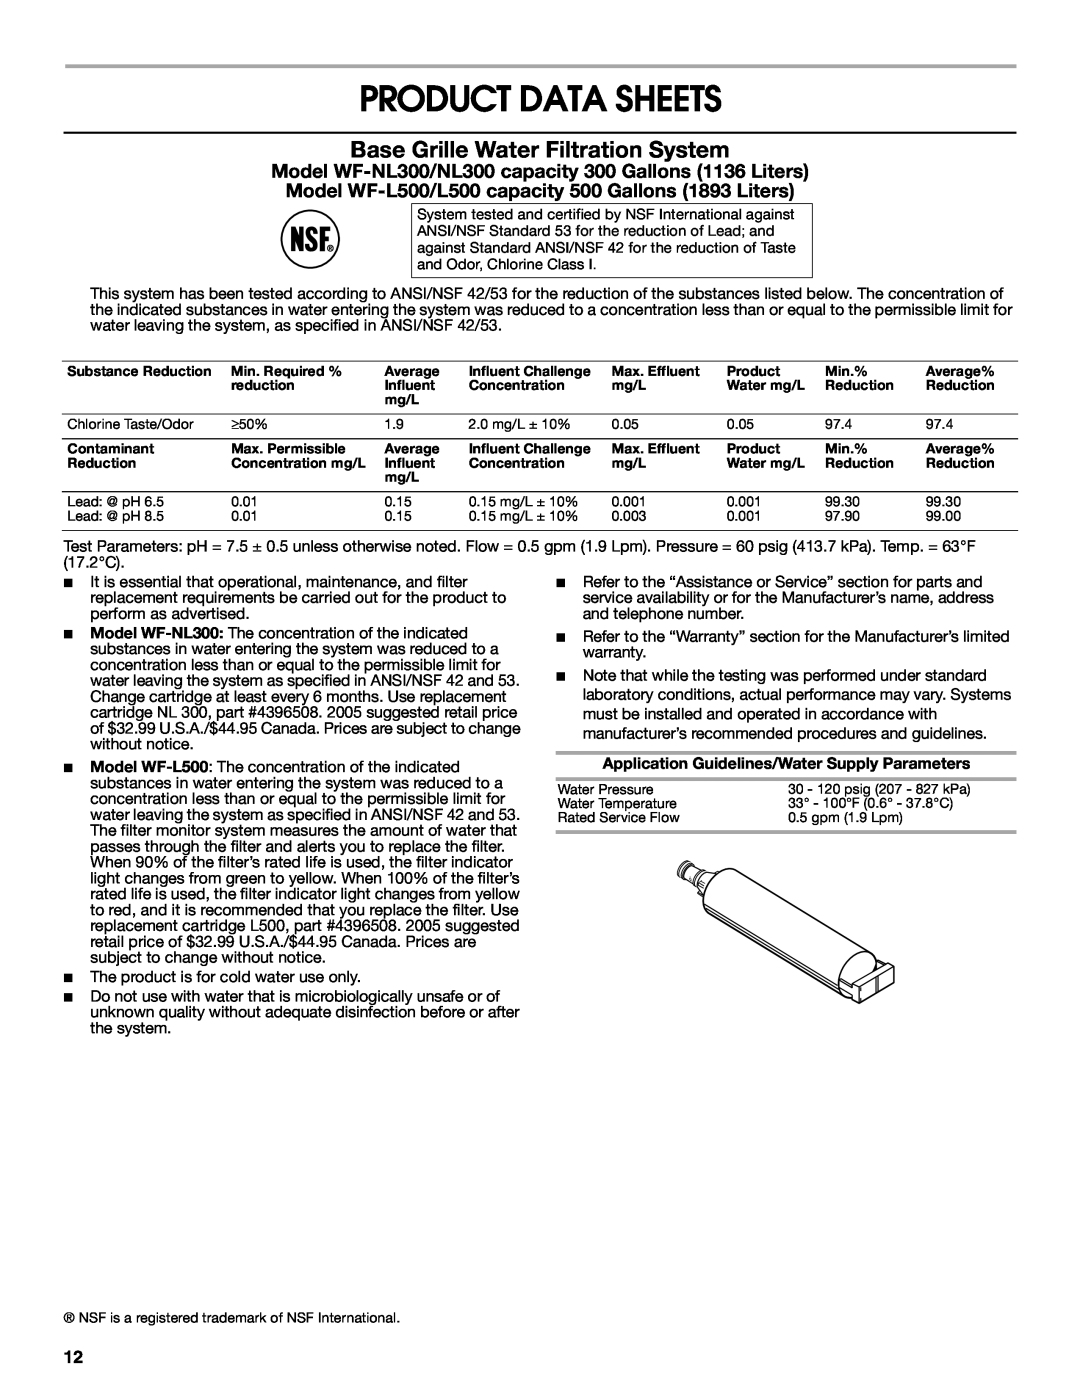 Whirlpool RS22AQXKQ00 warranty Product Data Sheets, Base Grille Water Filtration System 